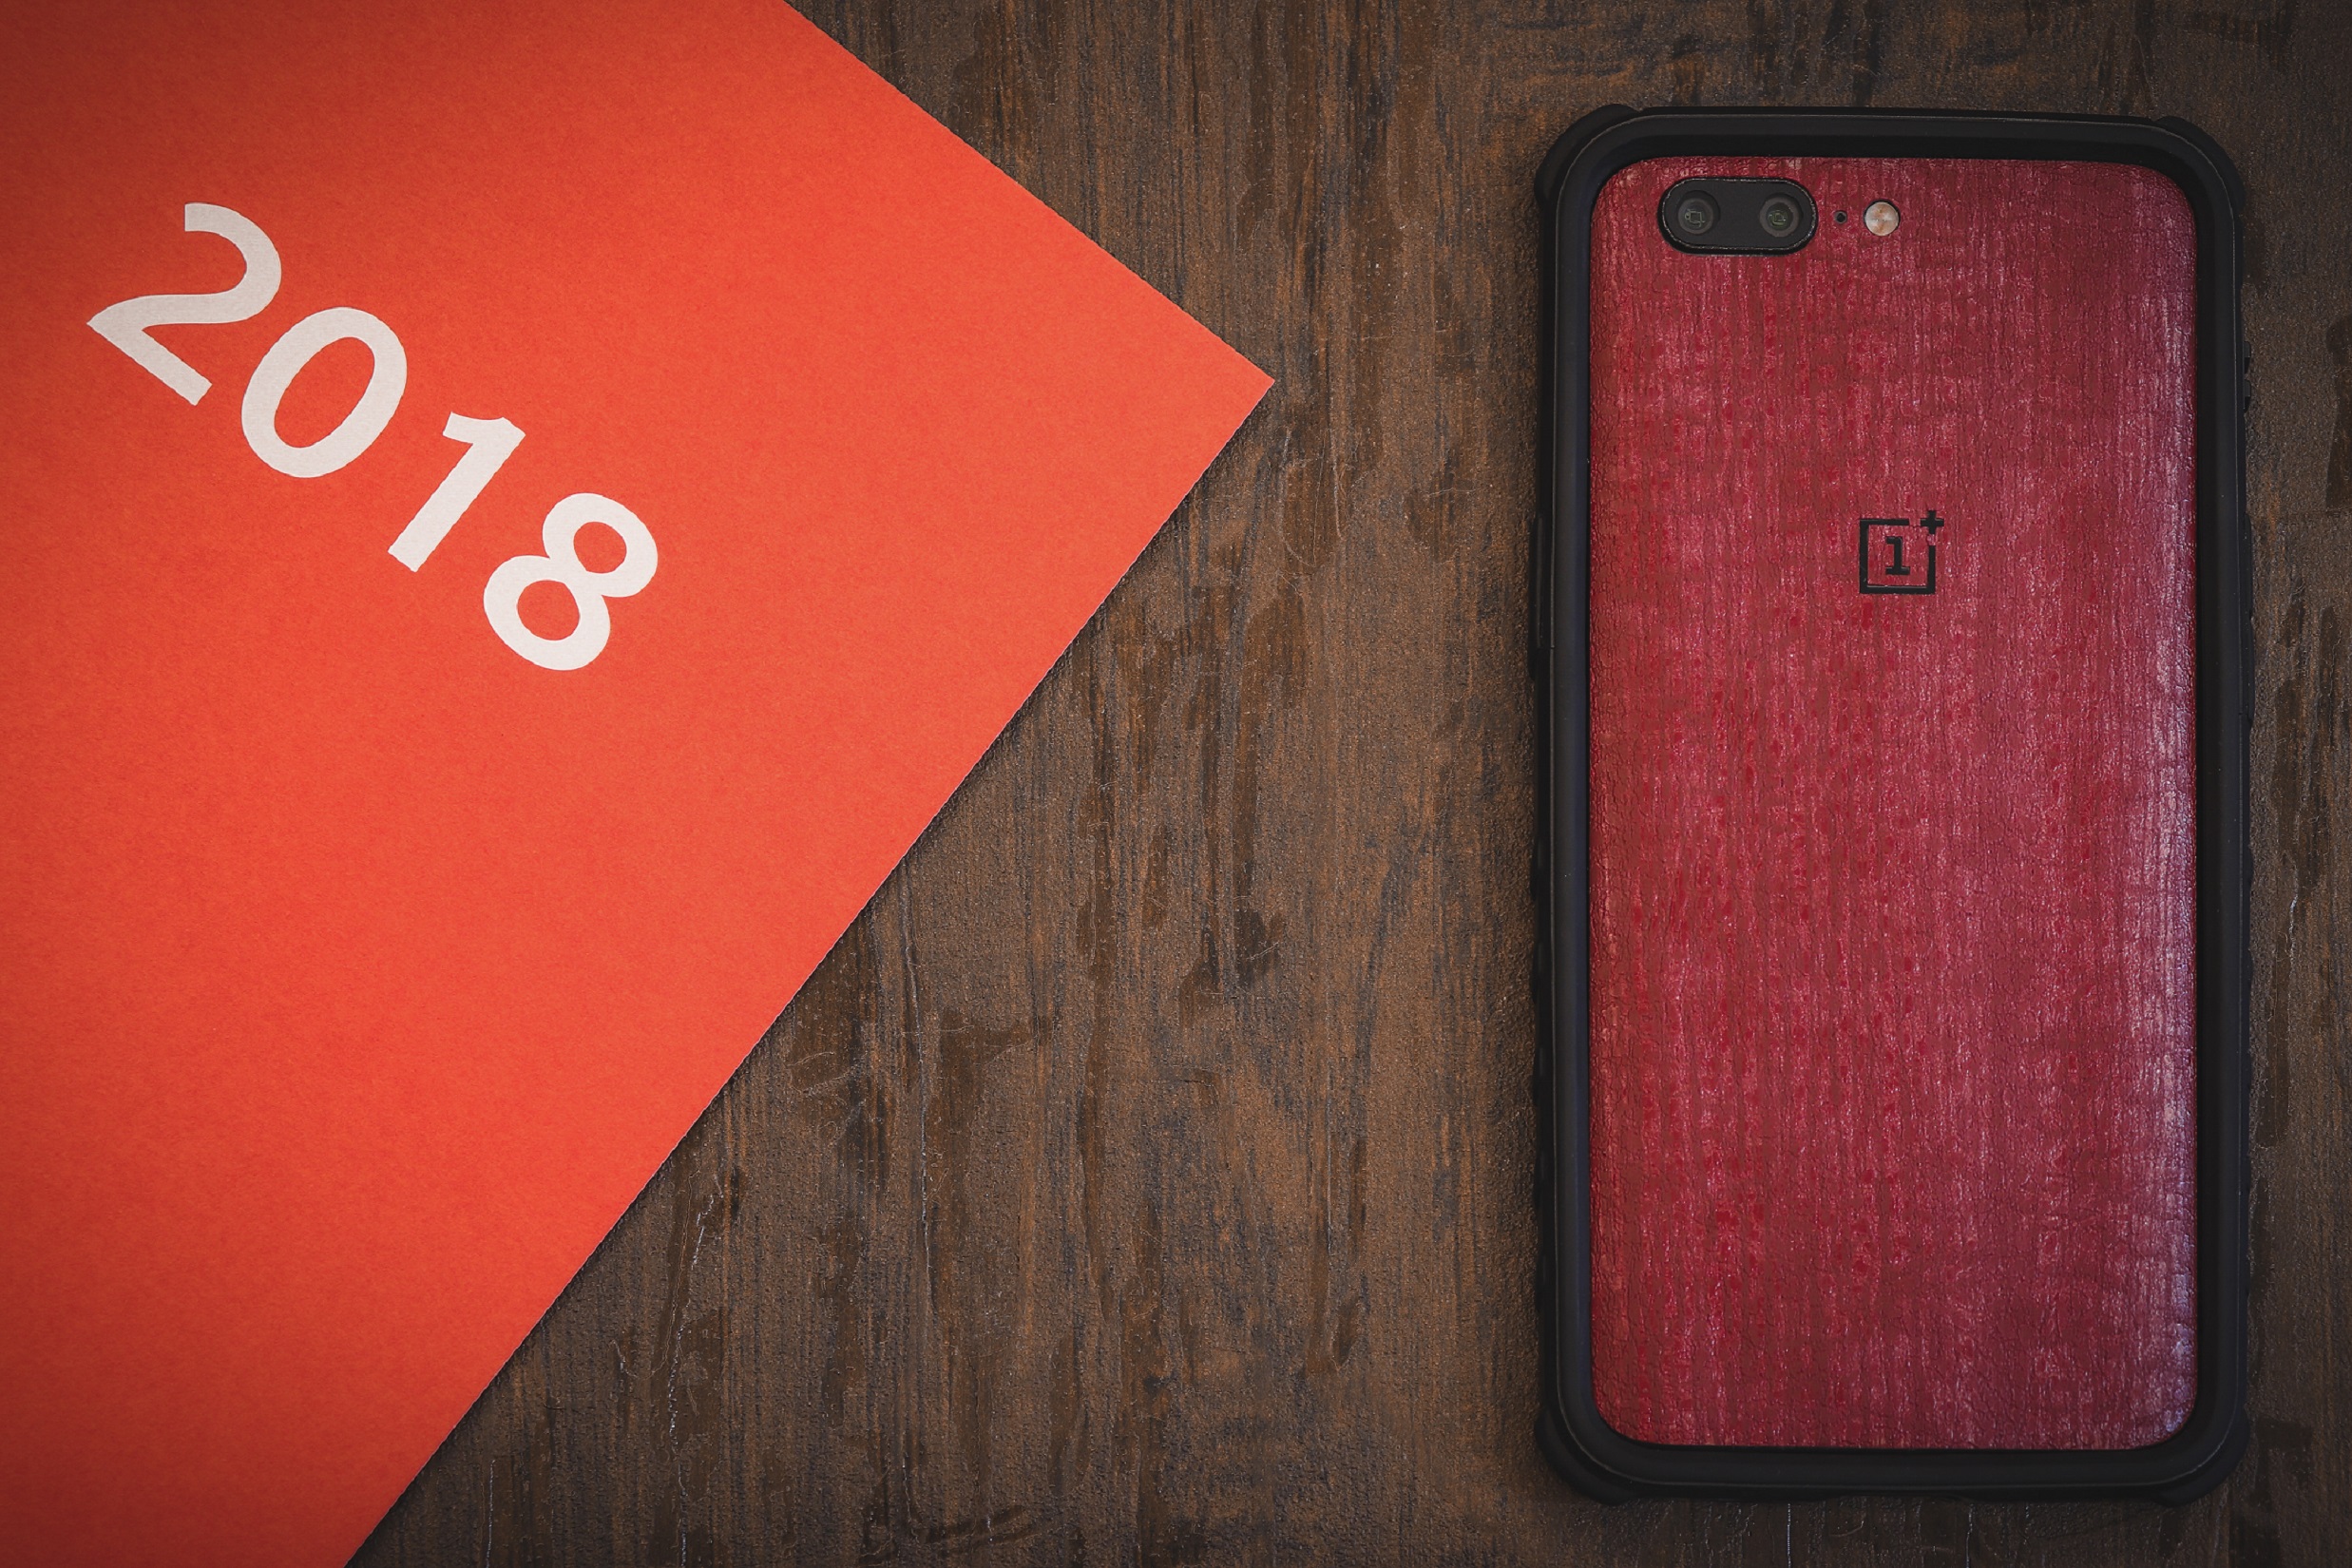 OnePlus forgets its promise for updates; OnePlus 5 still on April Security Patch (Update: OnePlus released a statement)